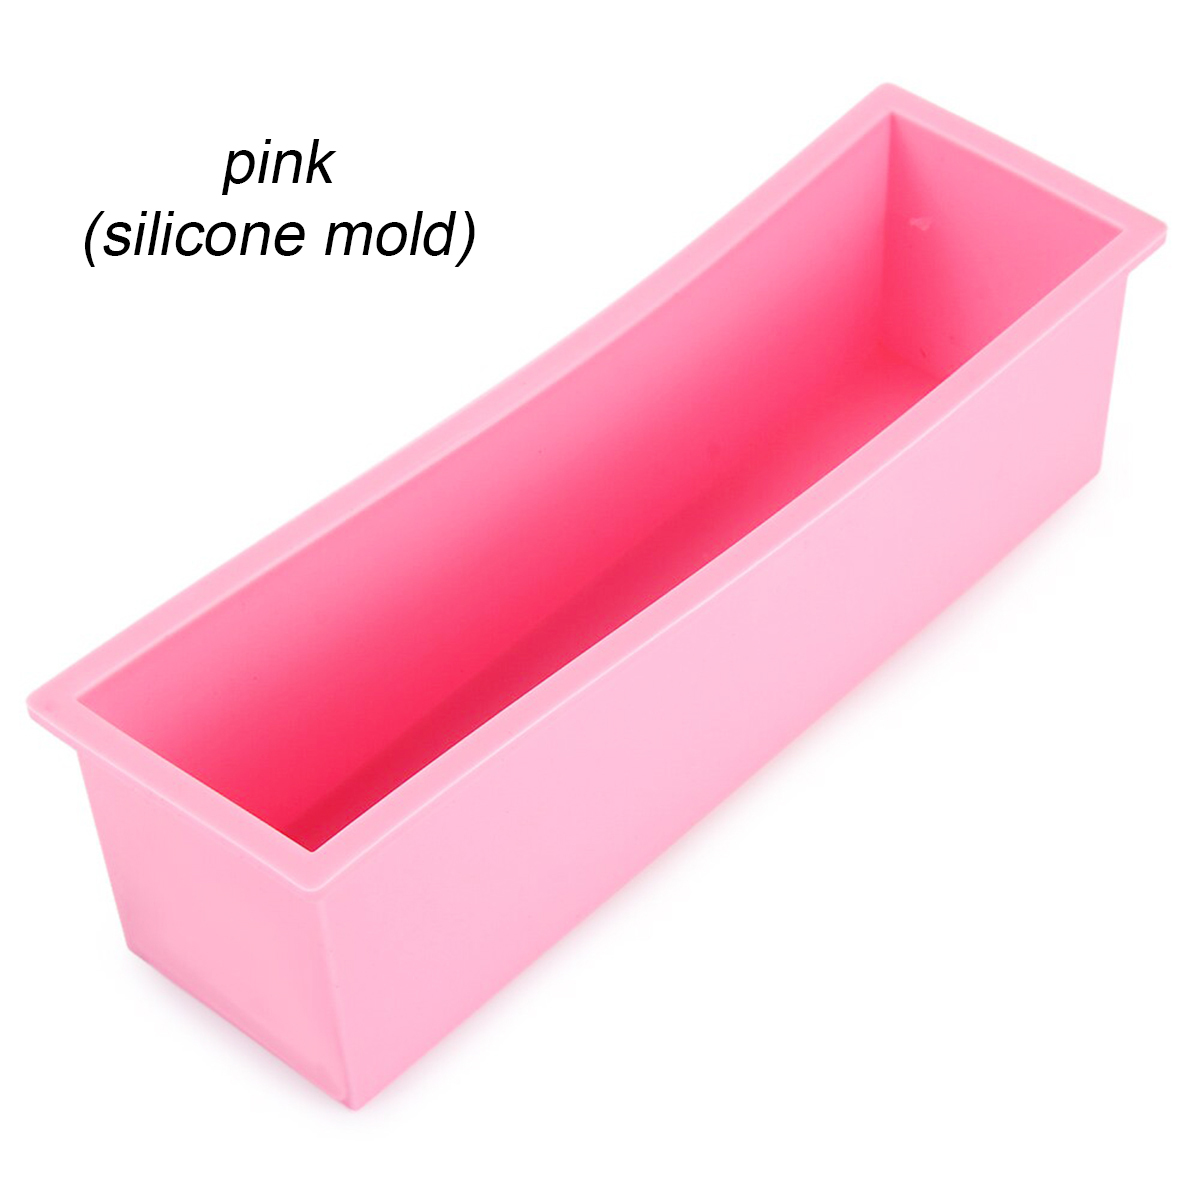 New-Wood-Loaf-Soap-Mould-with-Silicone-Mold-Cake-Making-Wooden-Box-Soap-1602226-5